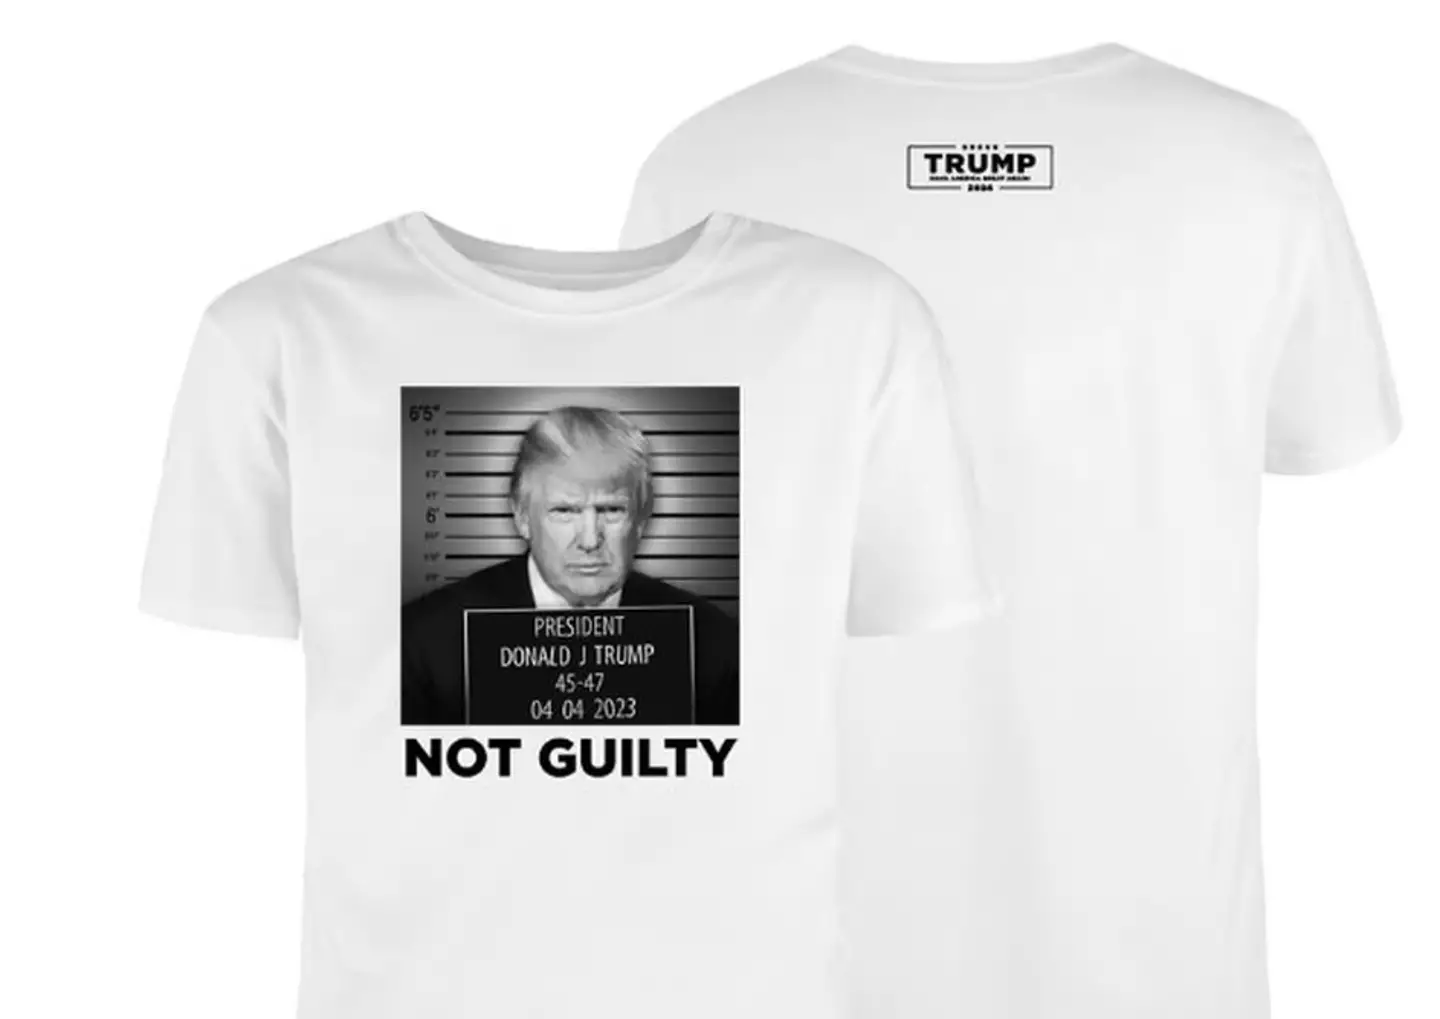 Trump's campaign team for his 2024 Presidential run have sold merchandise based on the indictments.